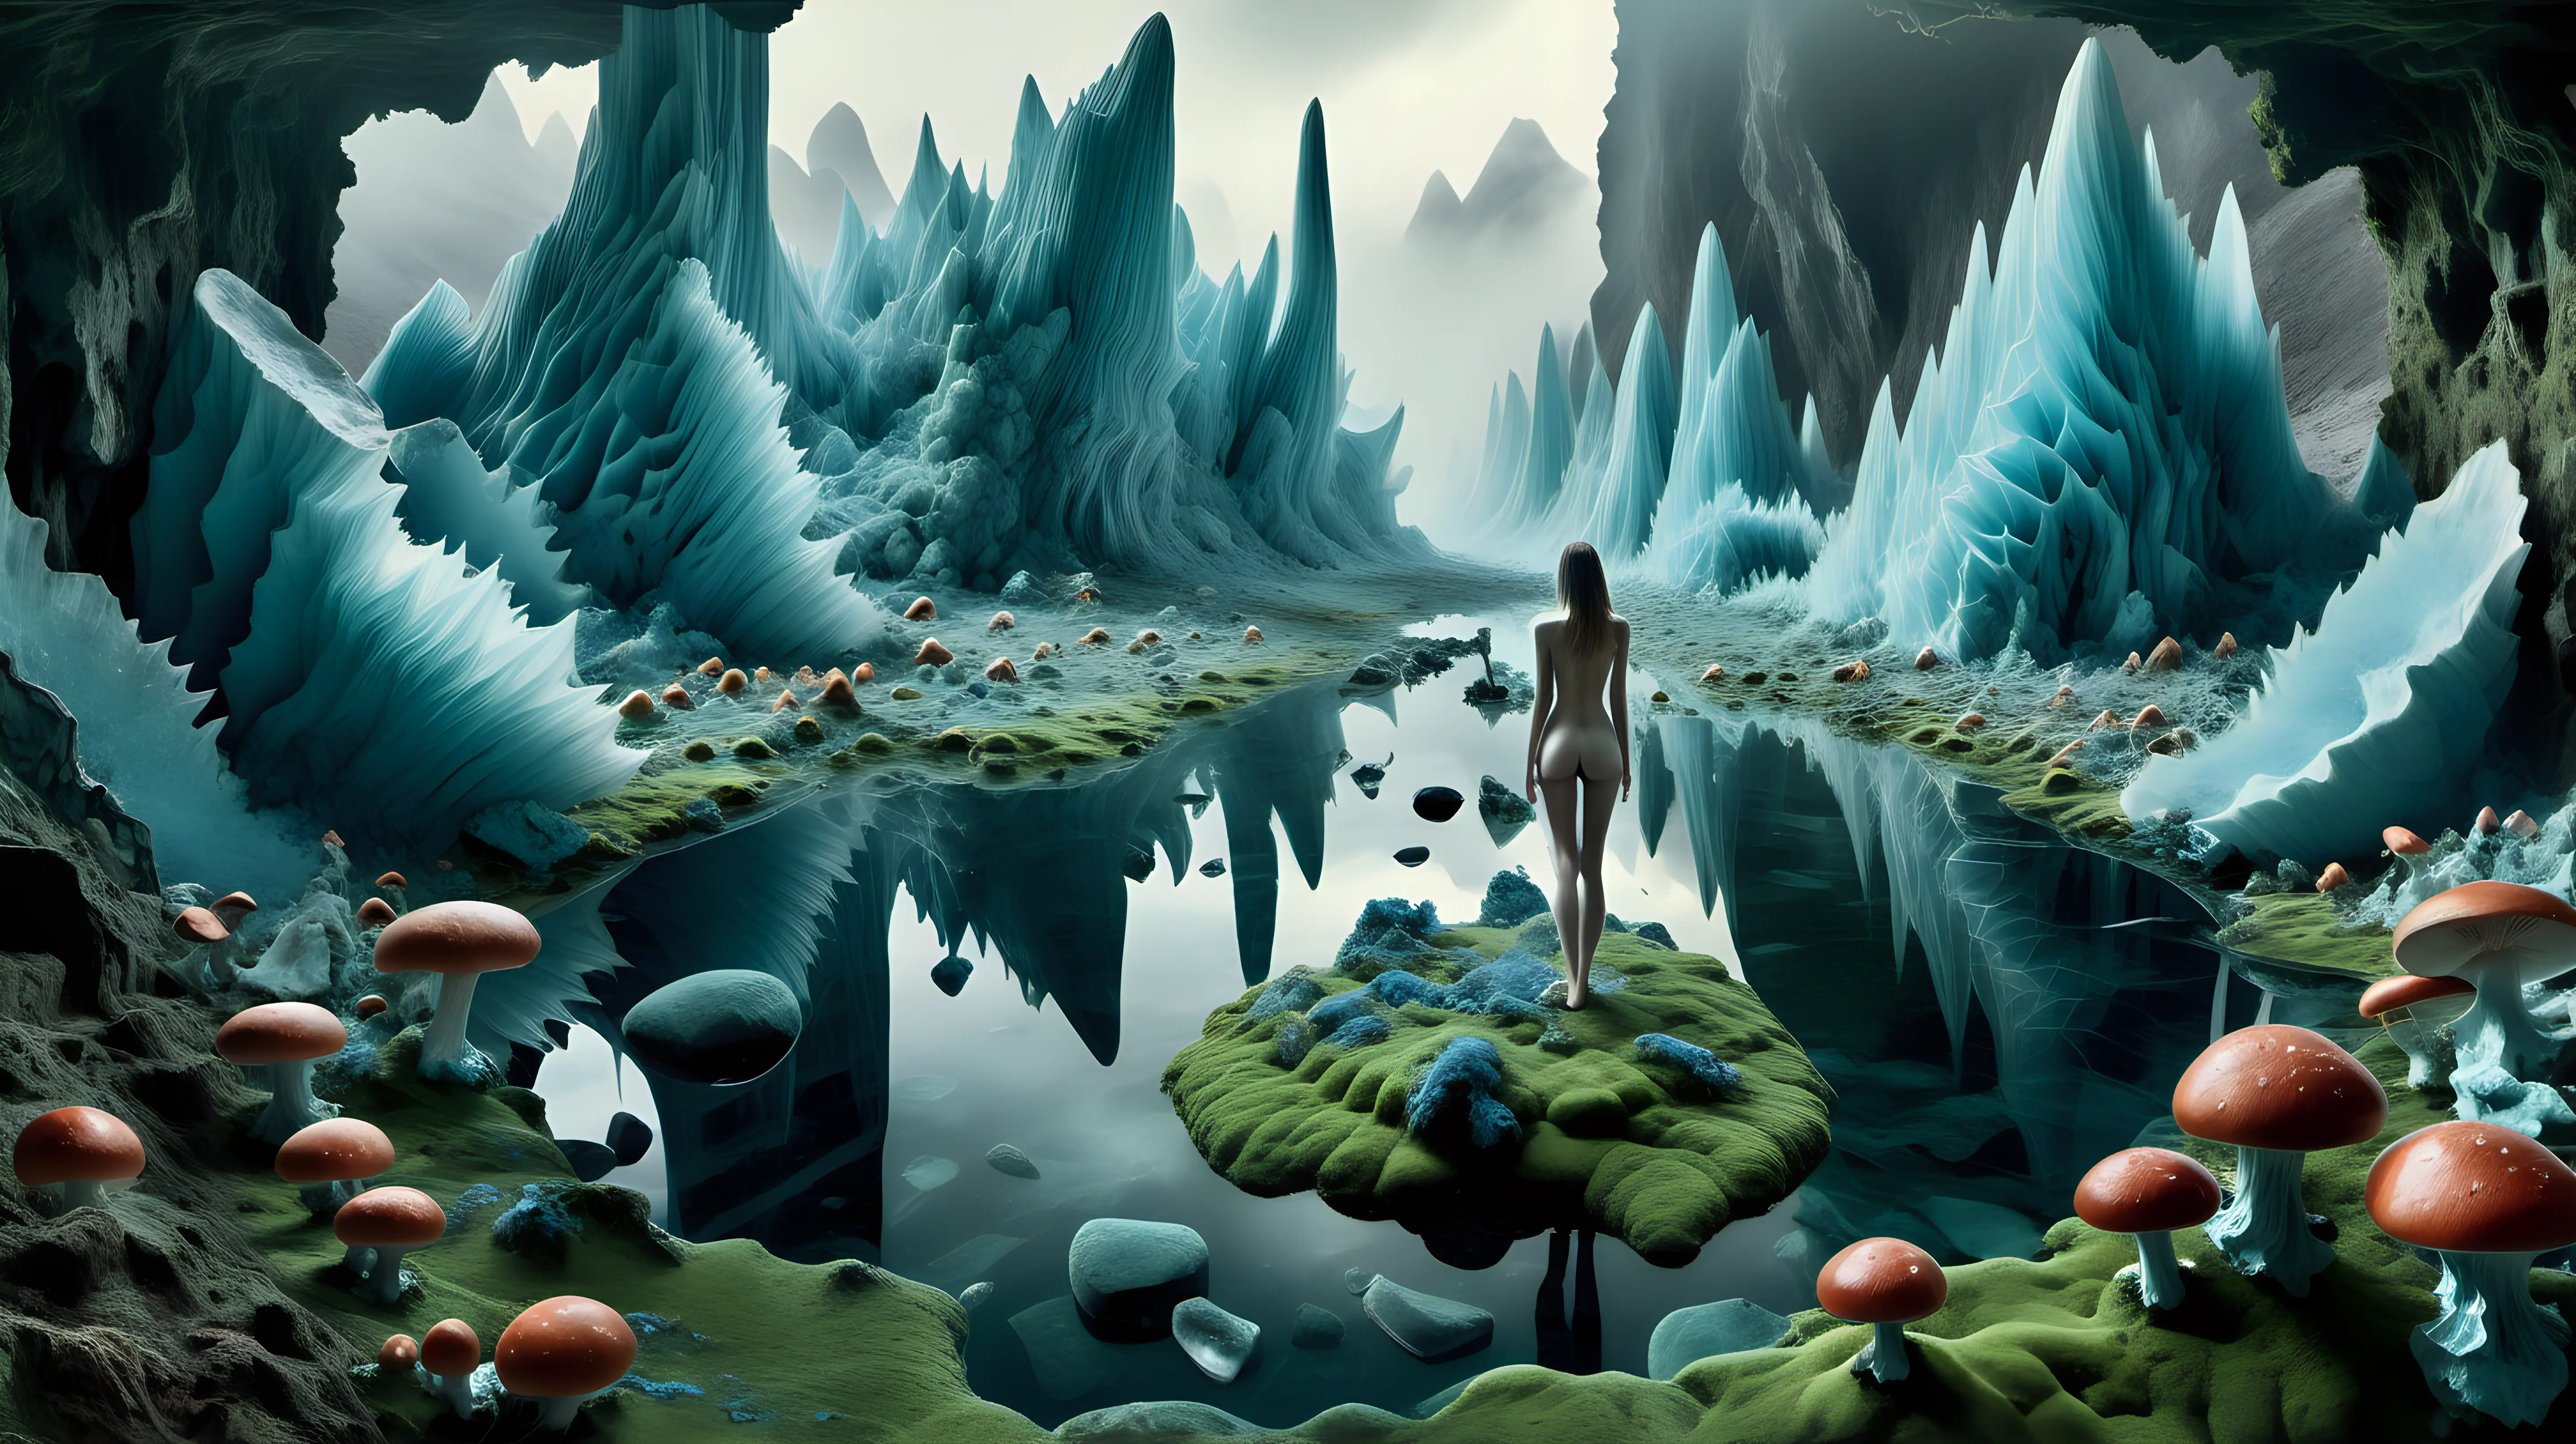 Psychedelic landscape, Rocky fractal glaciers, large crystalline bluish minerals, nude woman in center, Moss, large fleshy mushrooms, and water on the ground, serene, euphoric